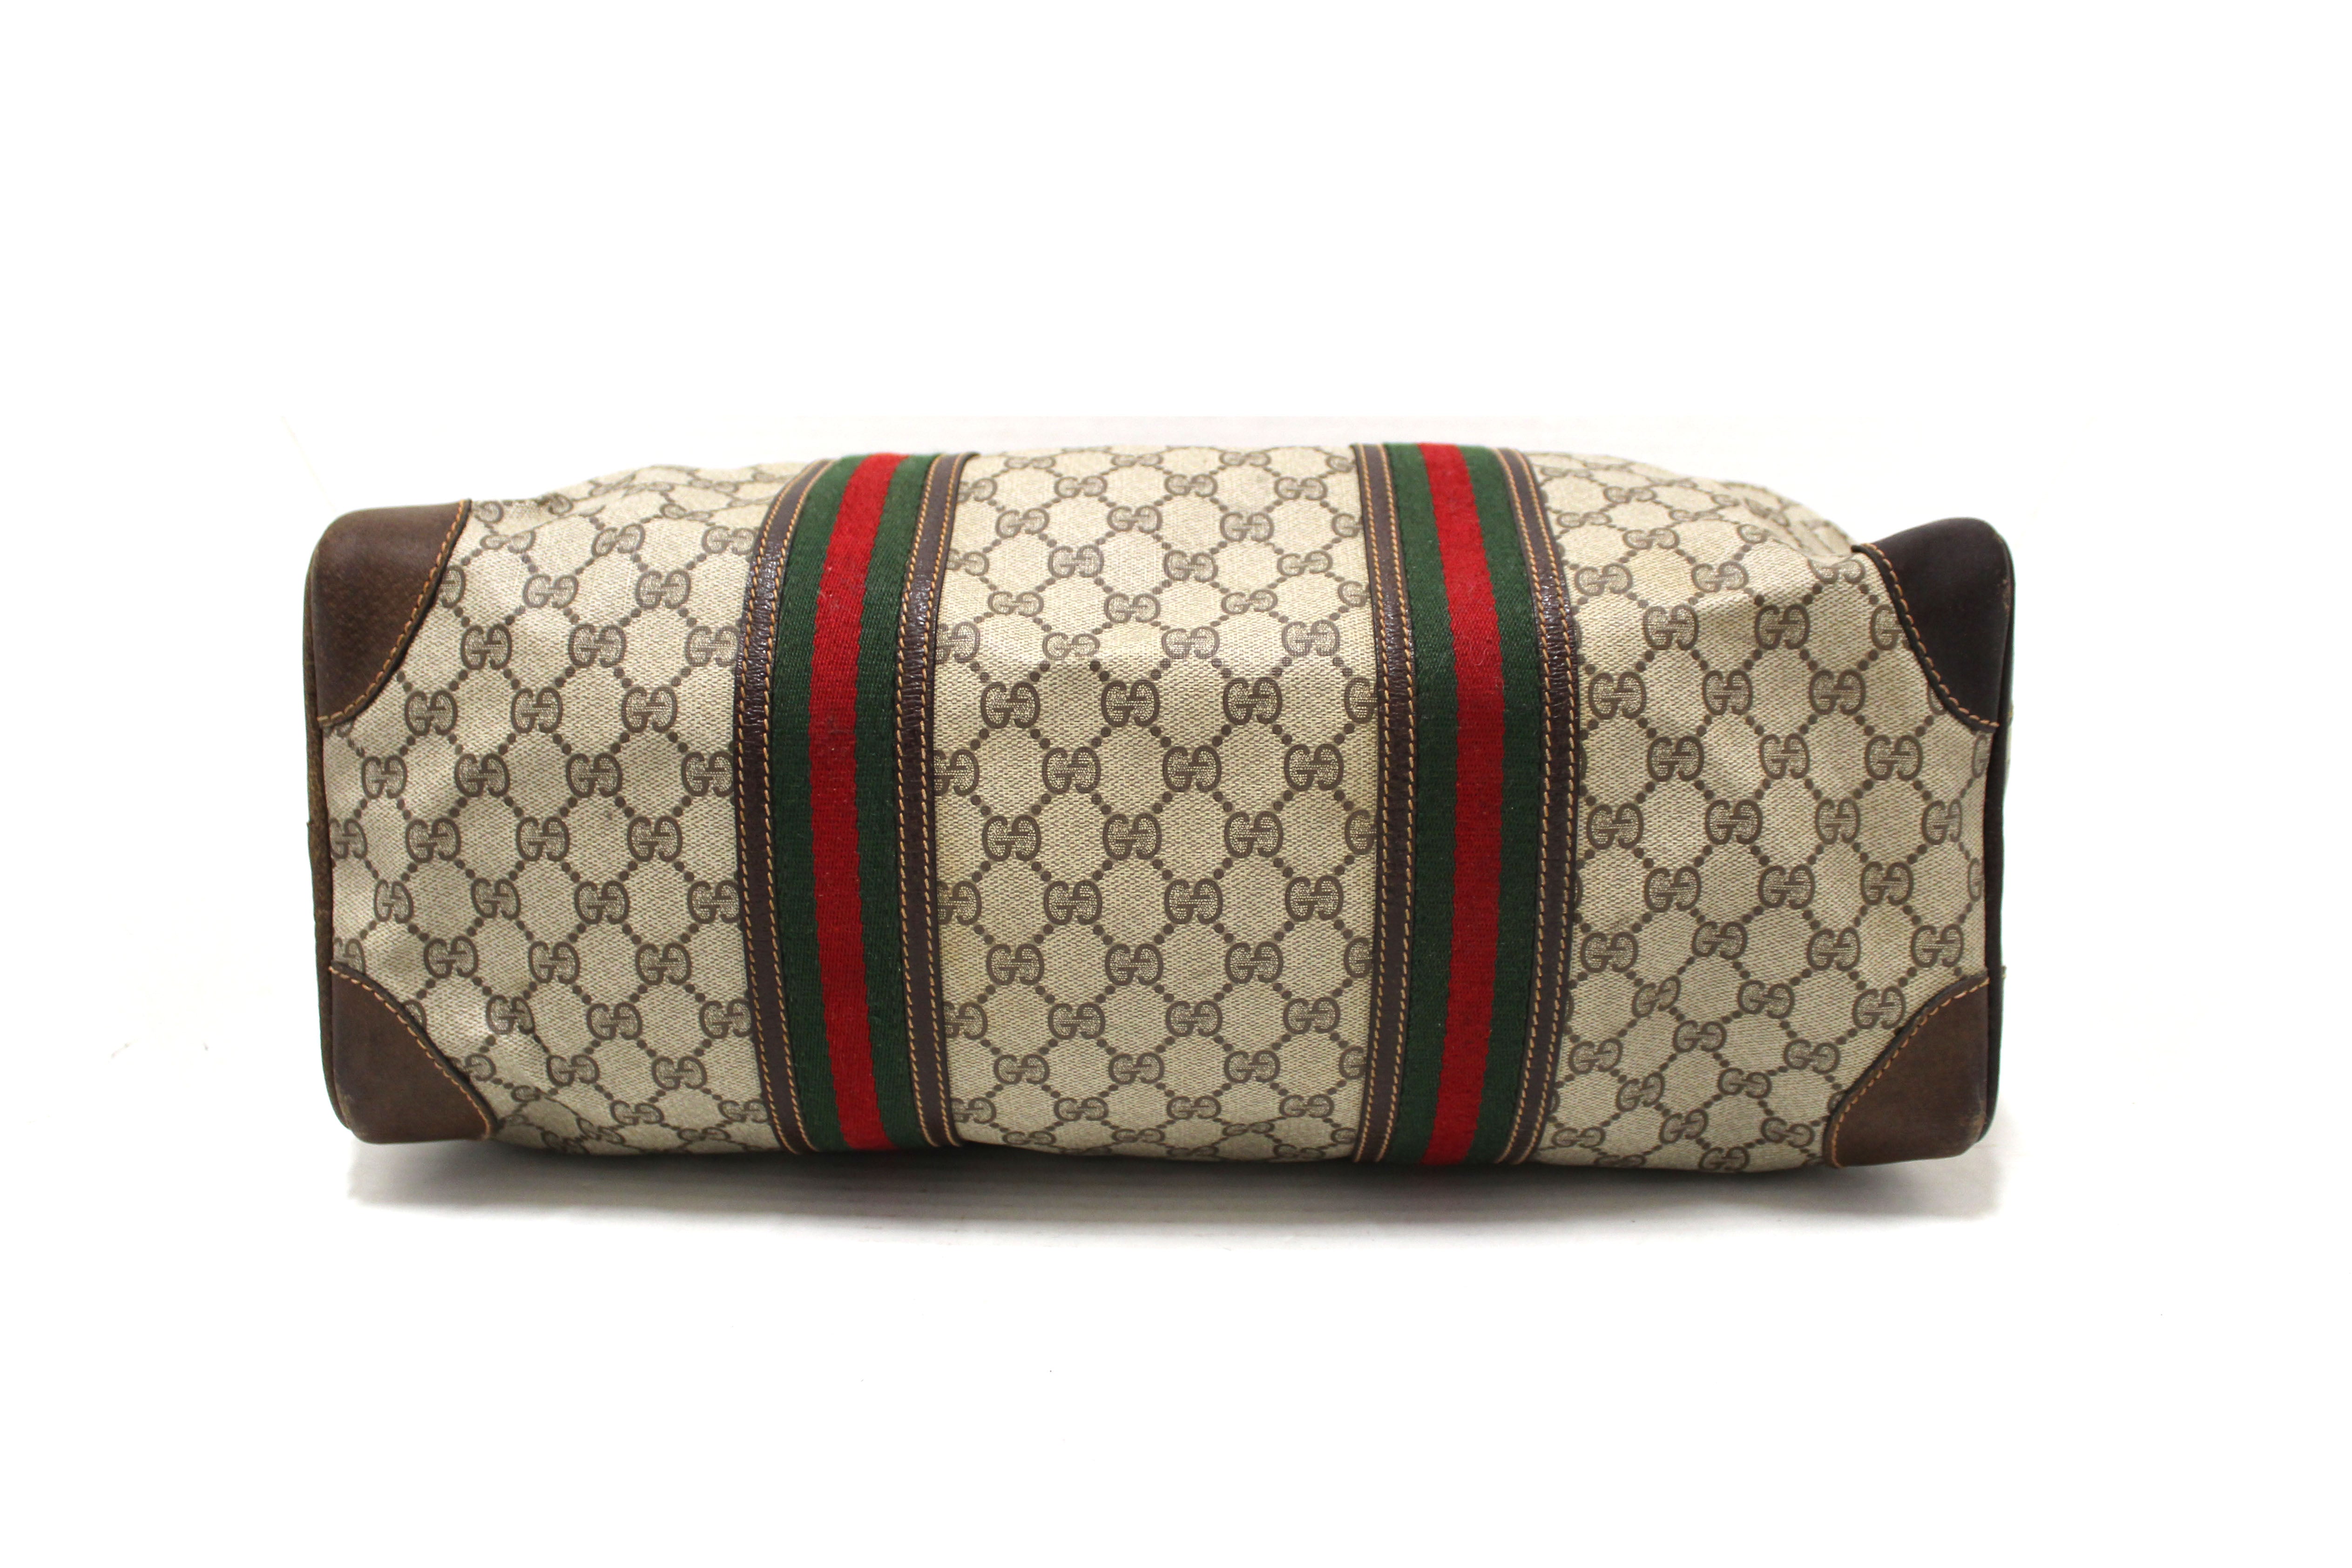 Authentic Gucci Vintage GG Supreme Duffle Travel Carry On Bag